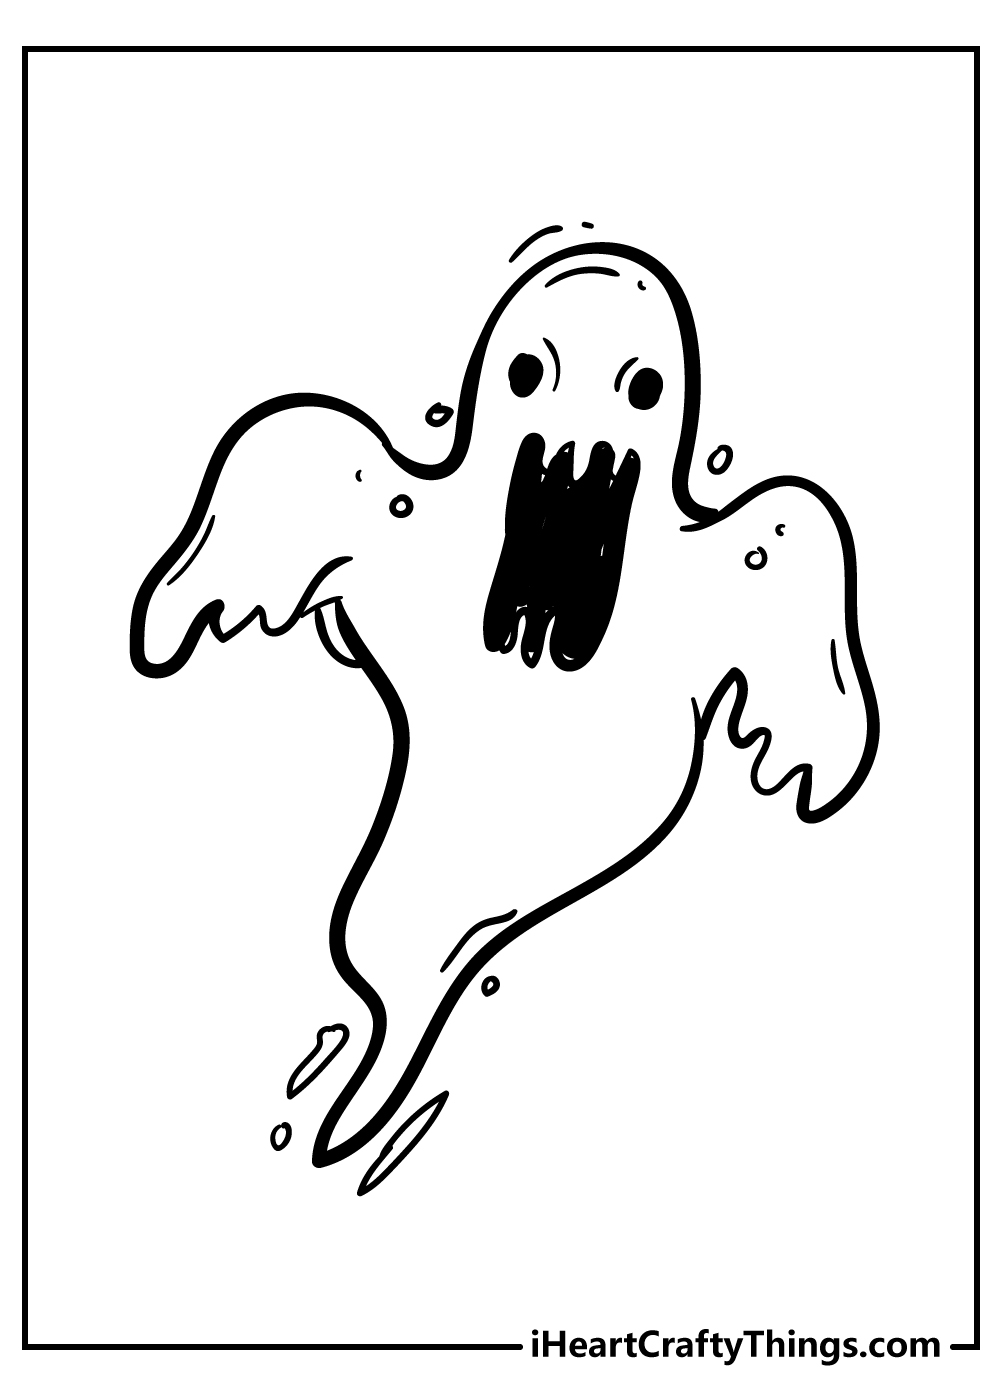 Ghost Coloring Pages for kids free download